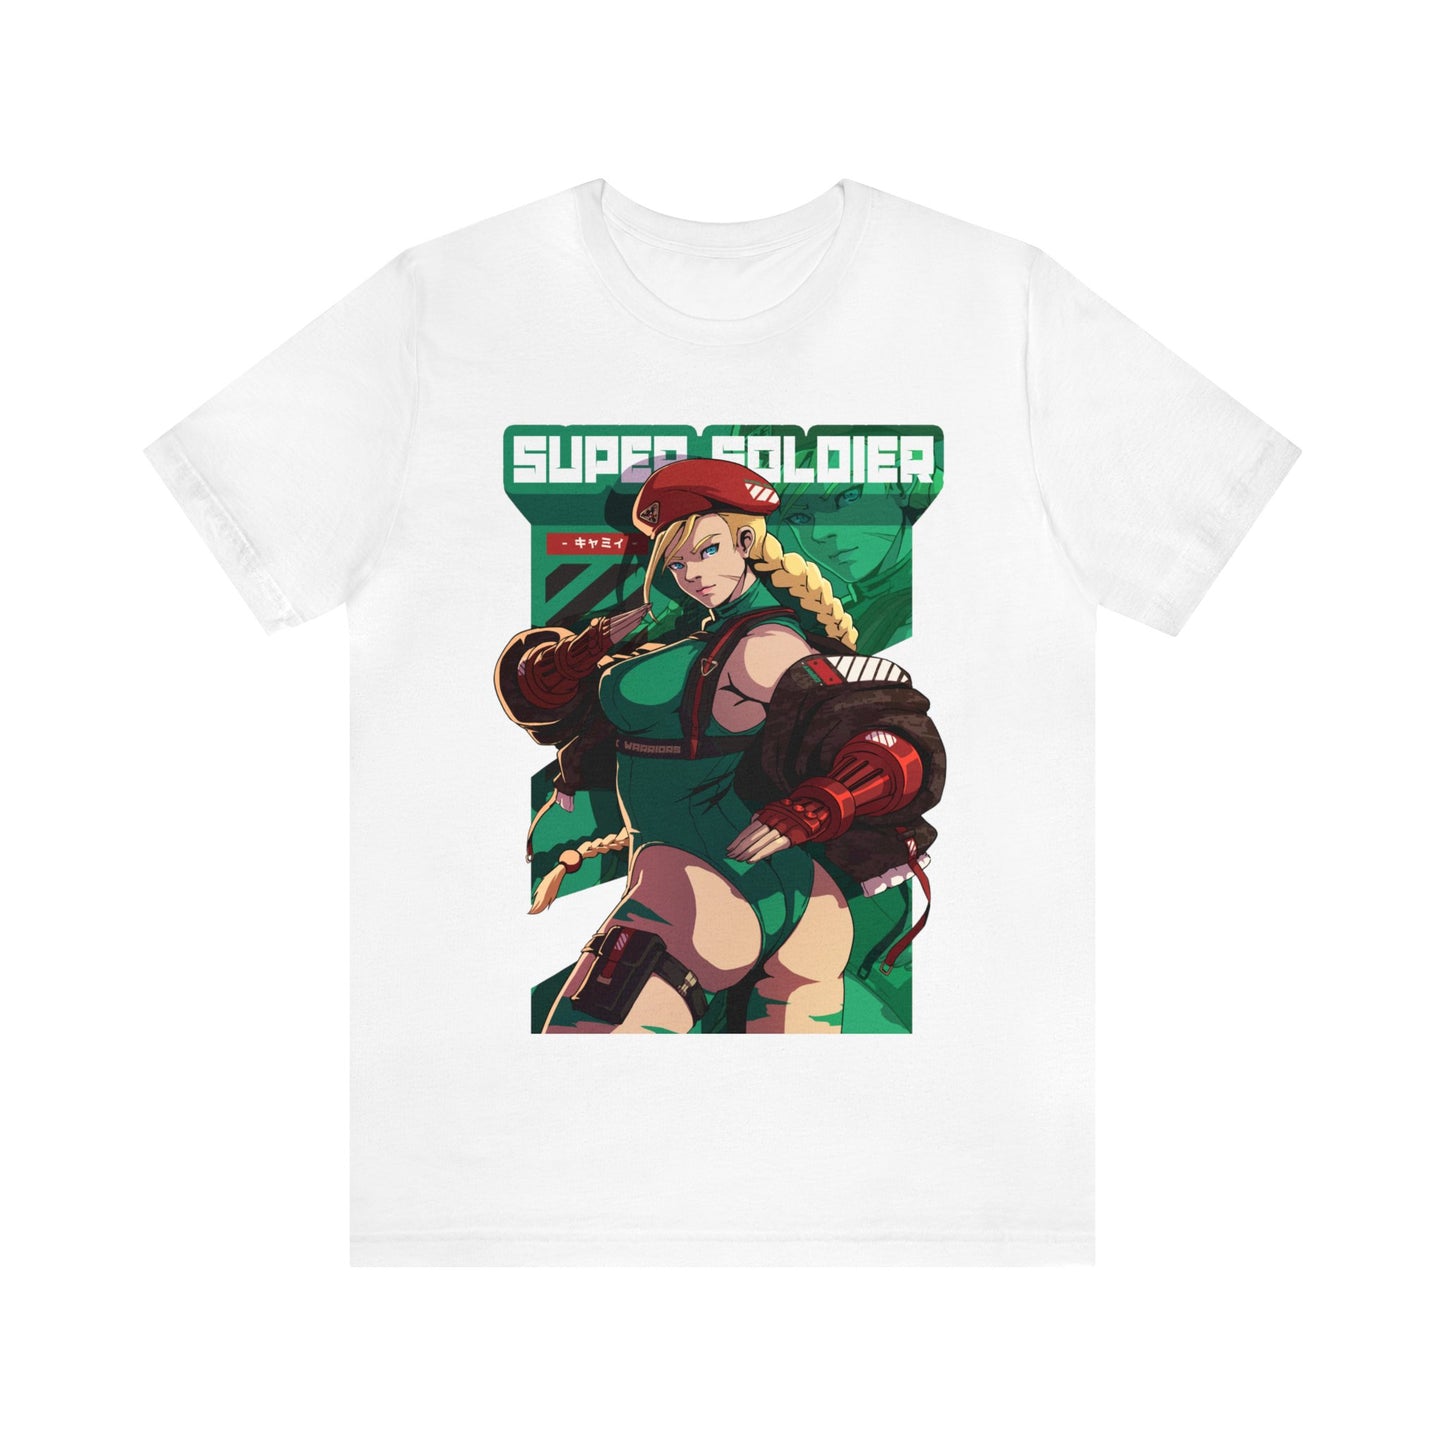 Super Soldier Classic Tee